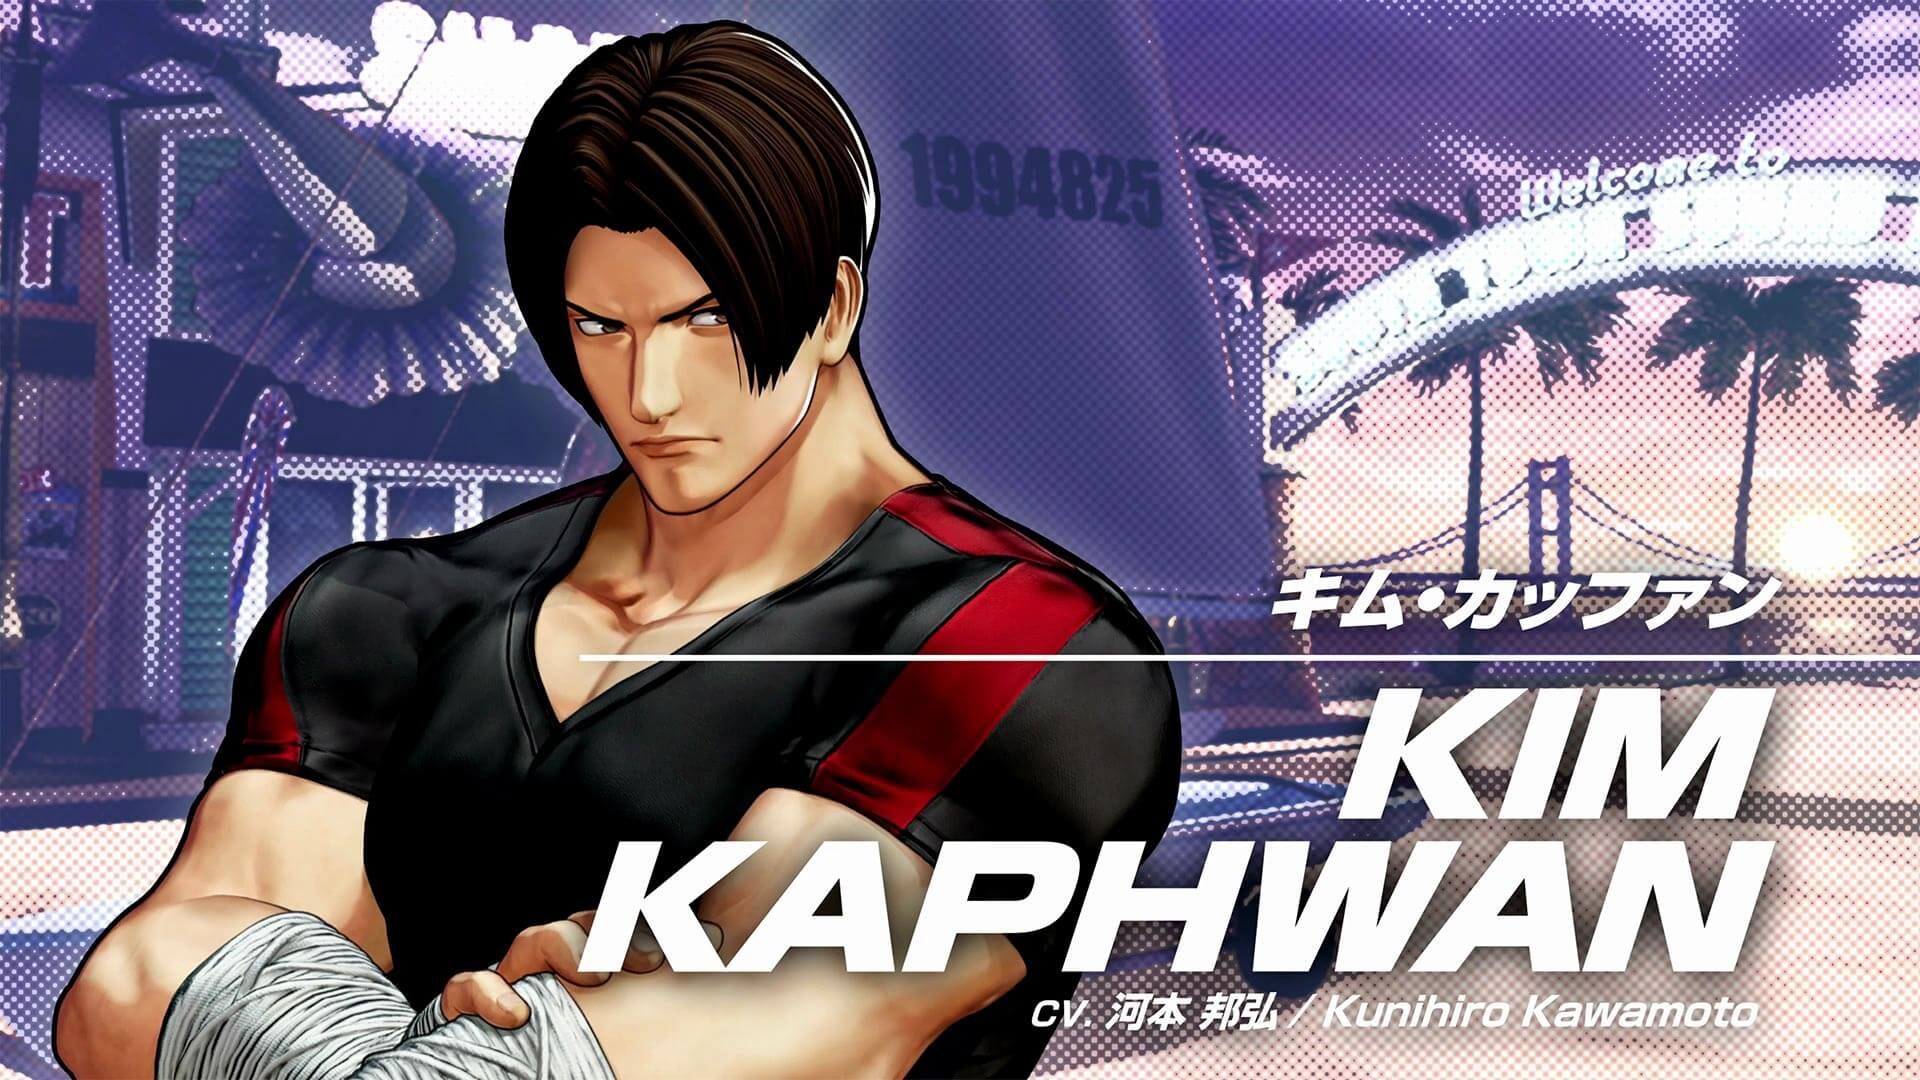 The King of Fighters XV New Trailer Introduces Kim Kaphwan